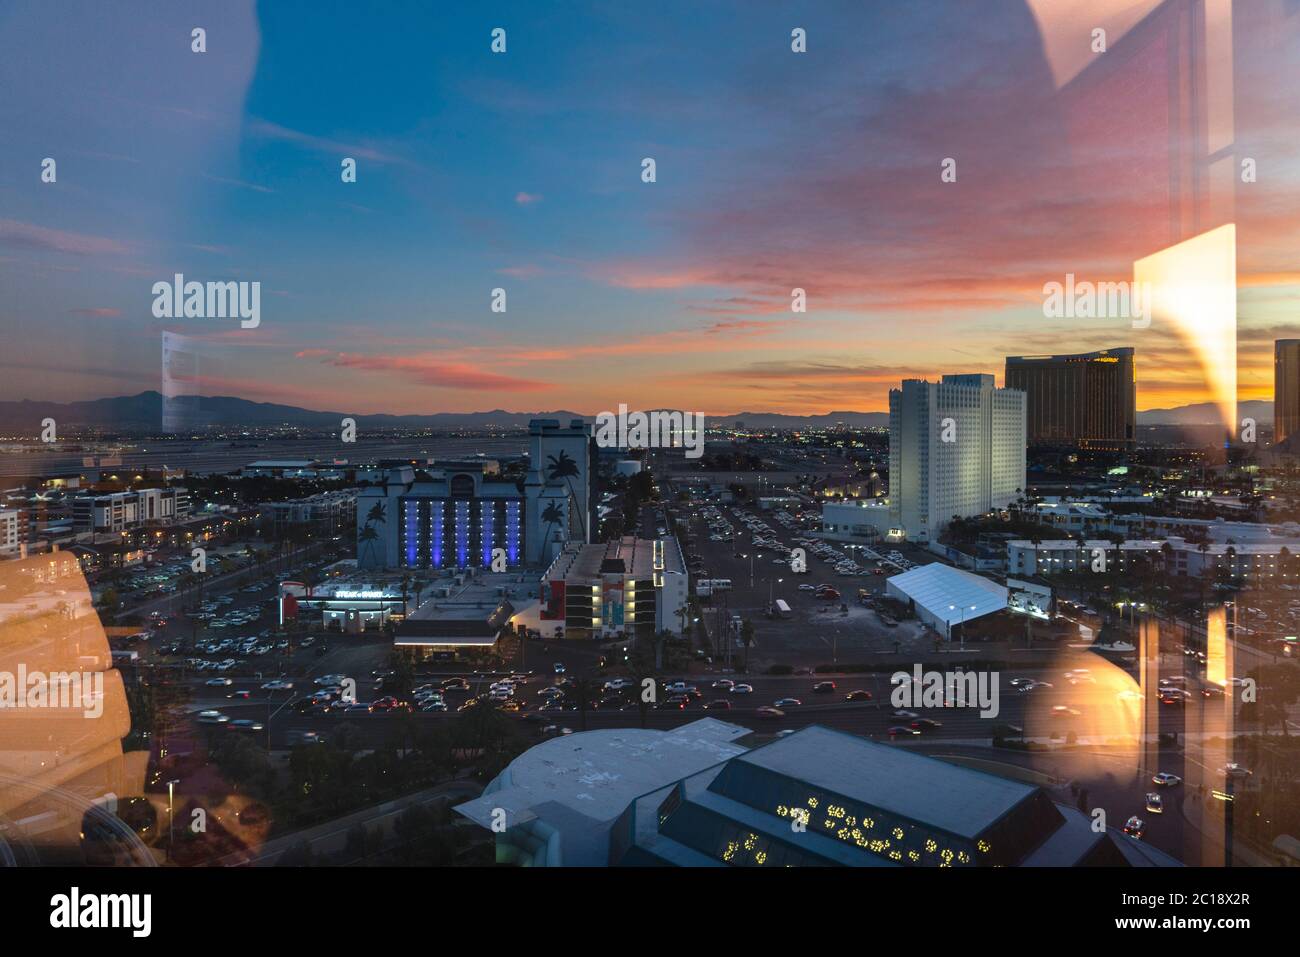 Sunset view of Las Vegas with colorful sky Stock Photo